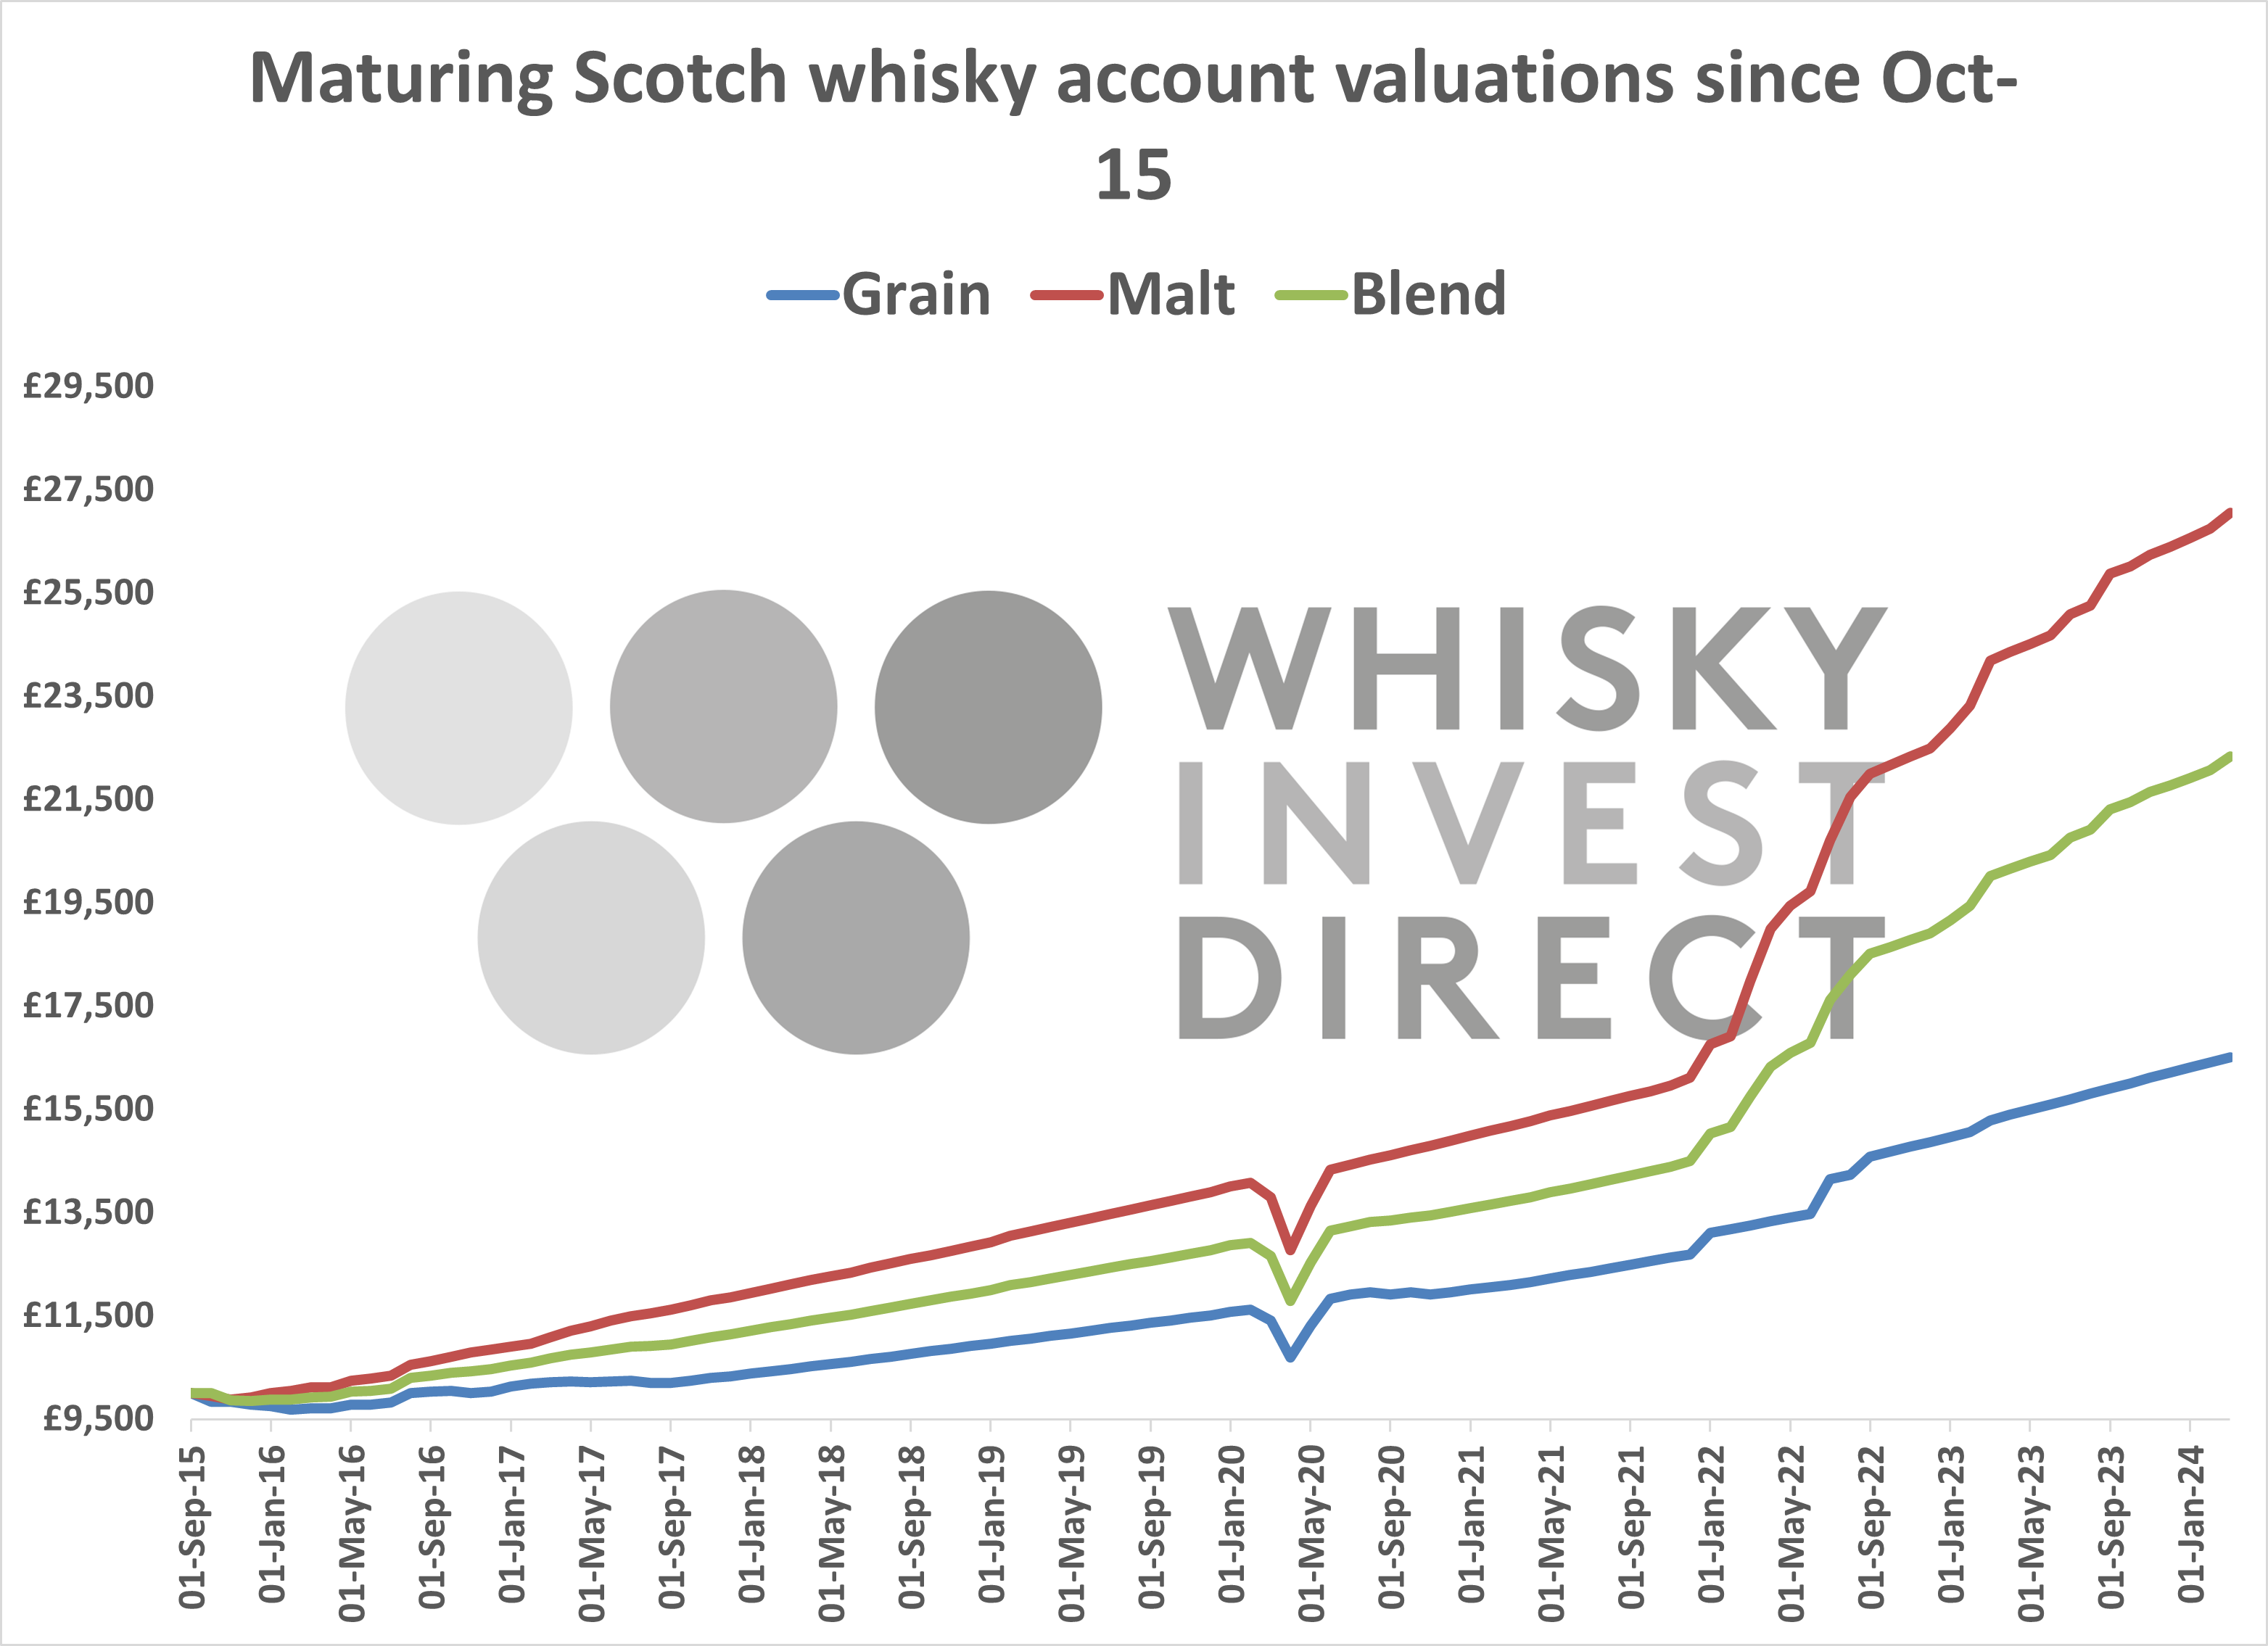 Maturing Scotch whisky account valuations since October 2015